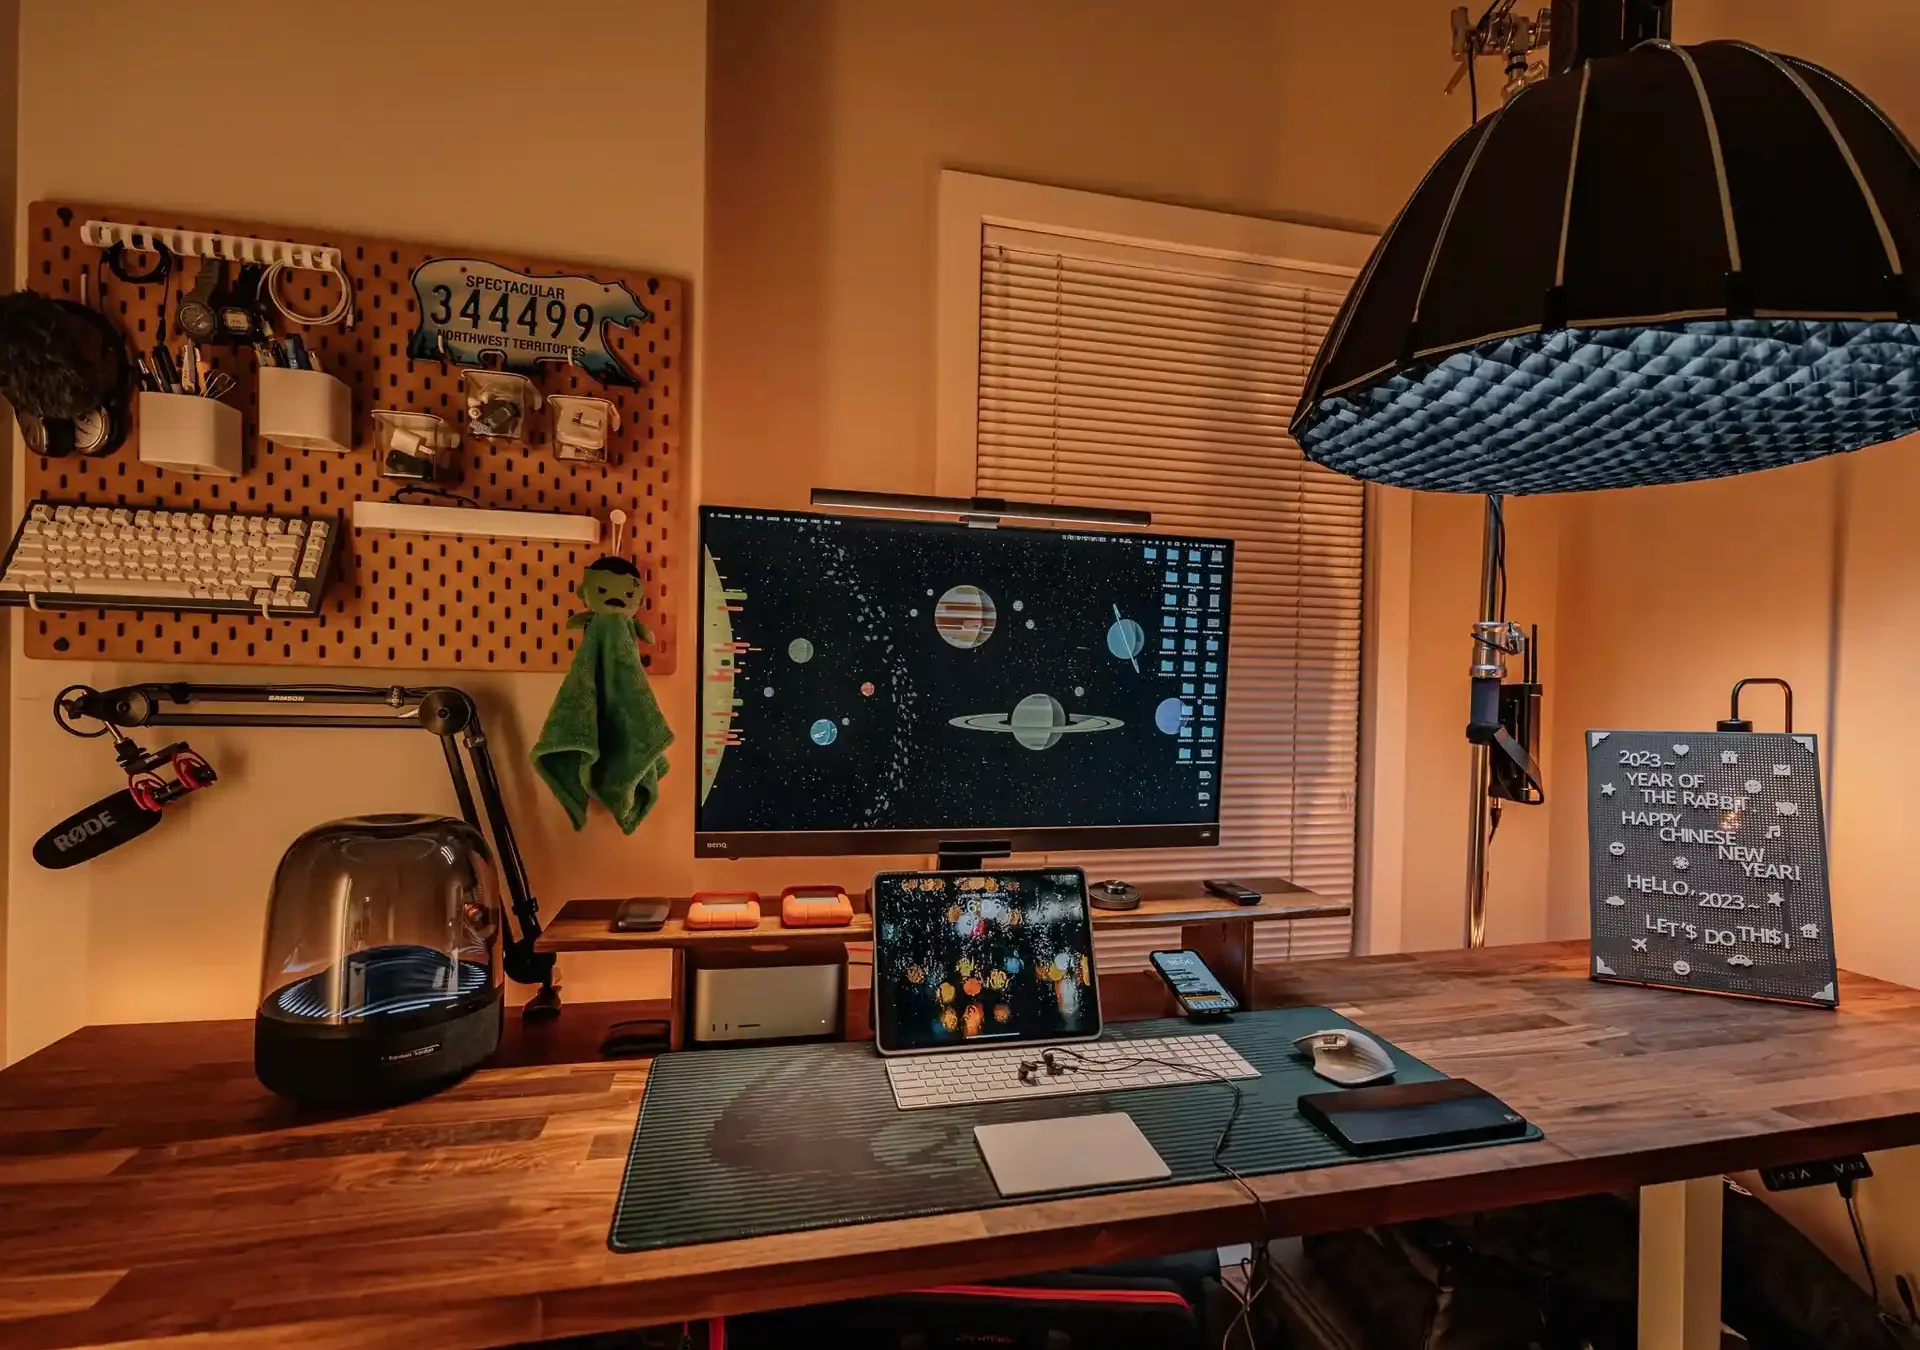 A cozy home office setup featuring a wooden desk with a computer displaying a space-themed wallpaper, various gadgets, and a pegboard with assorted items.